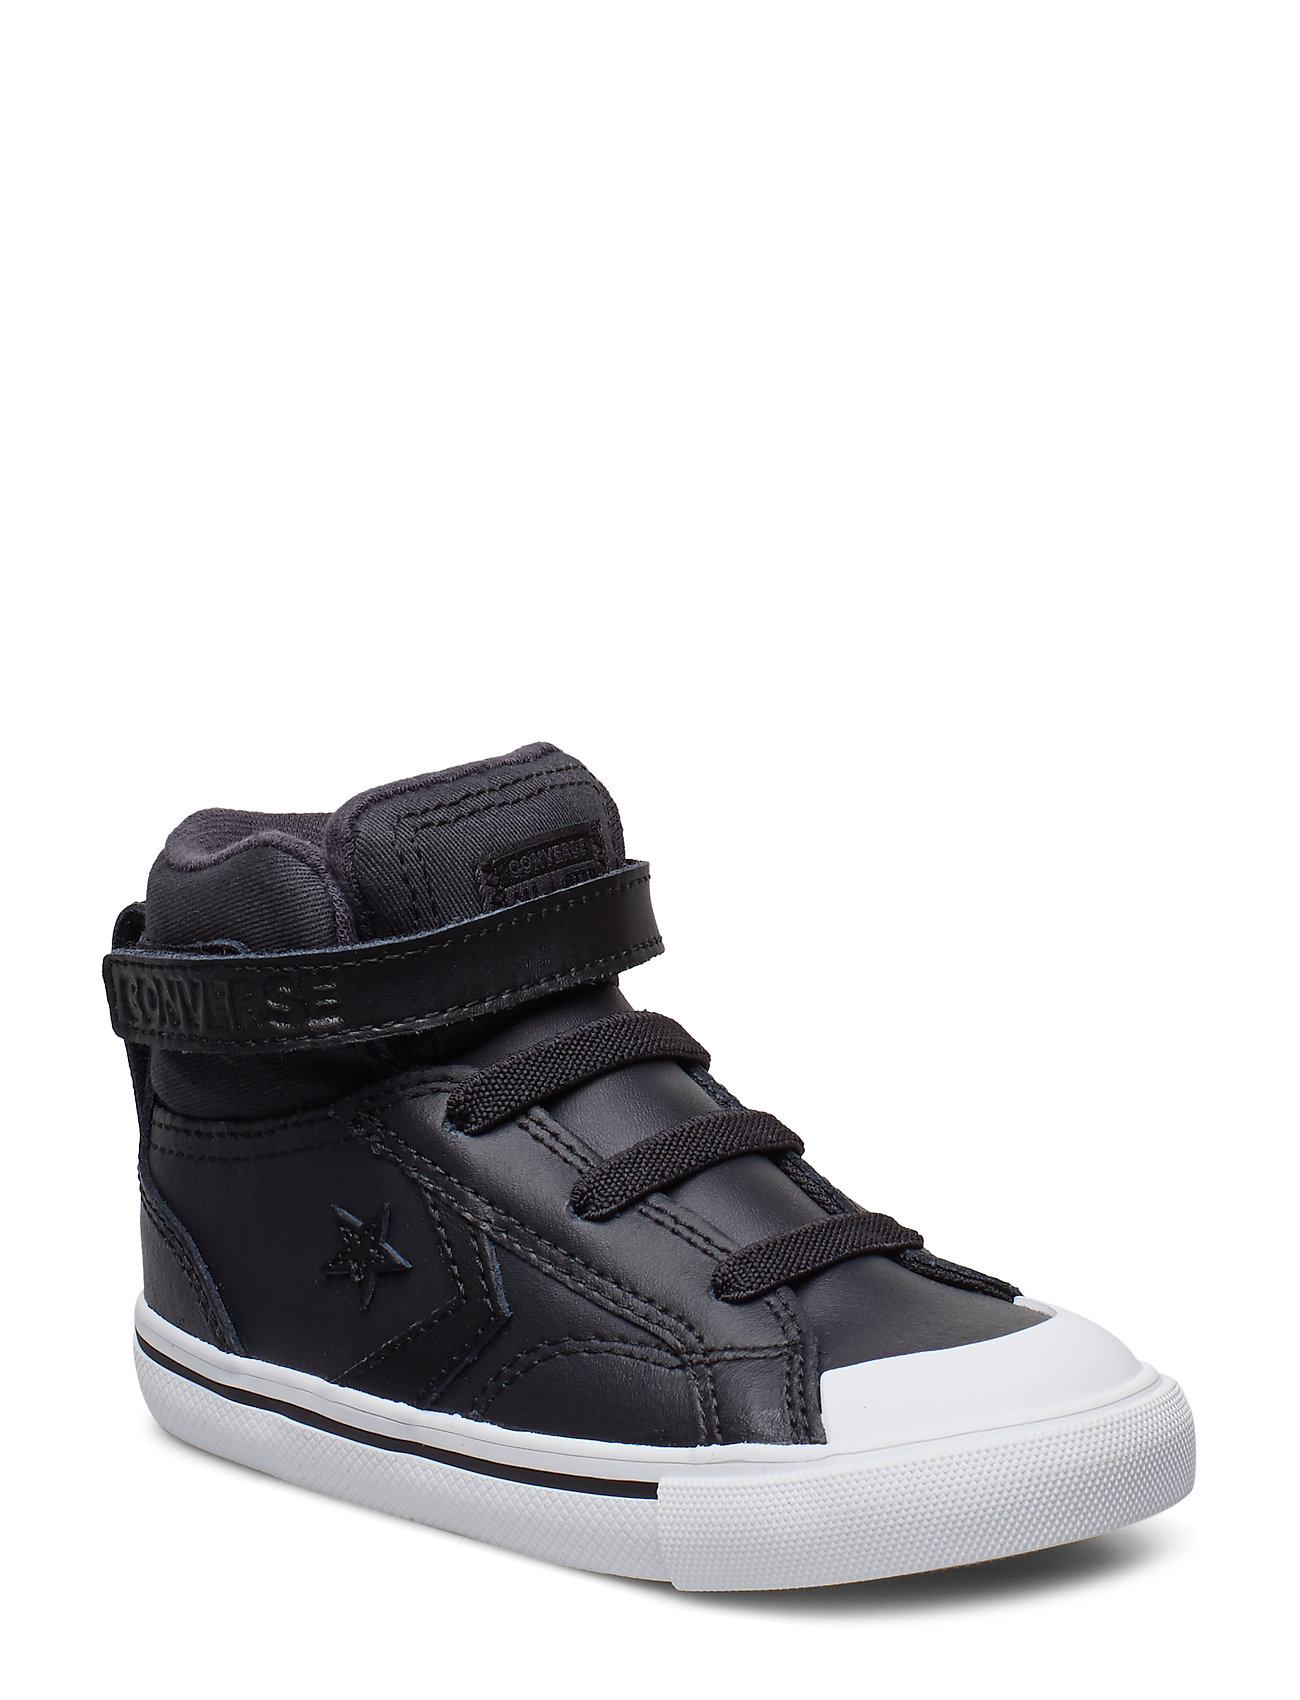 black converse with straps